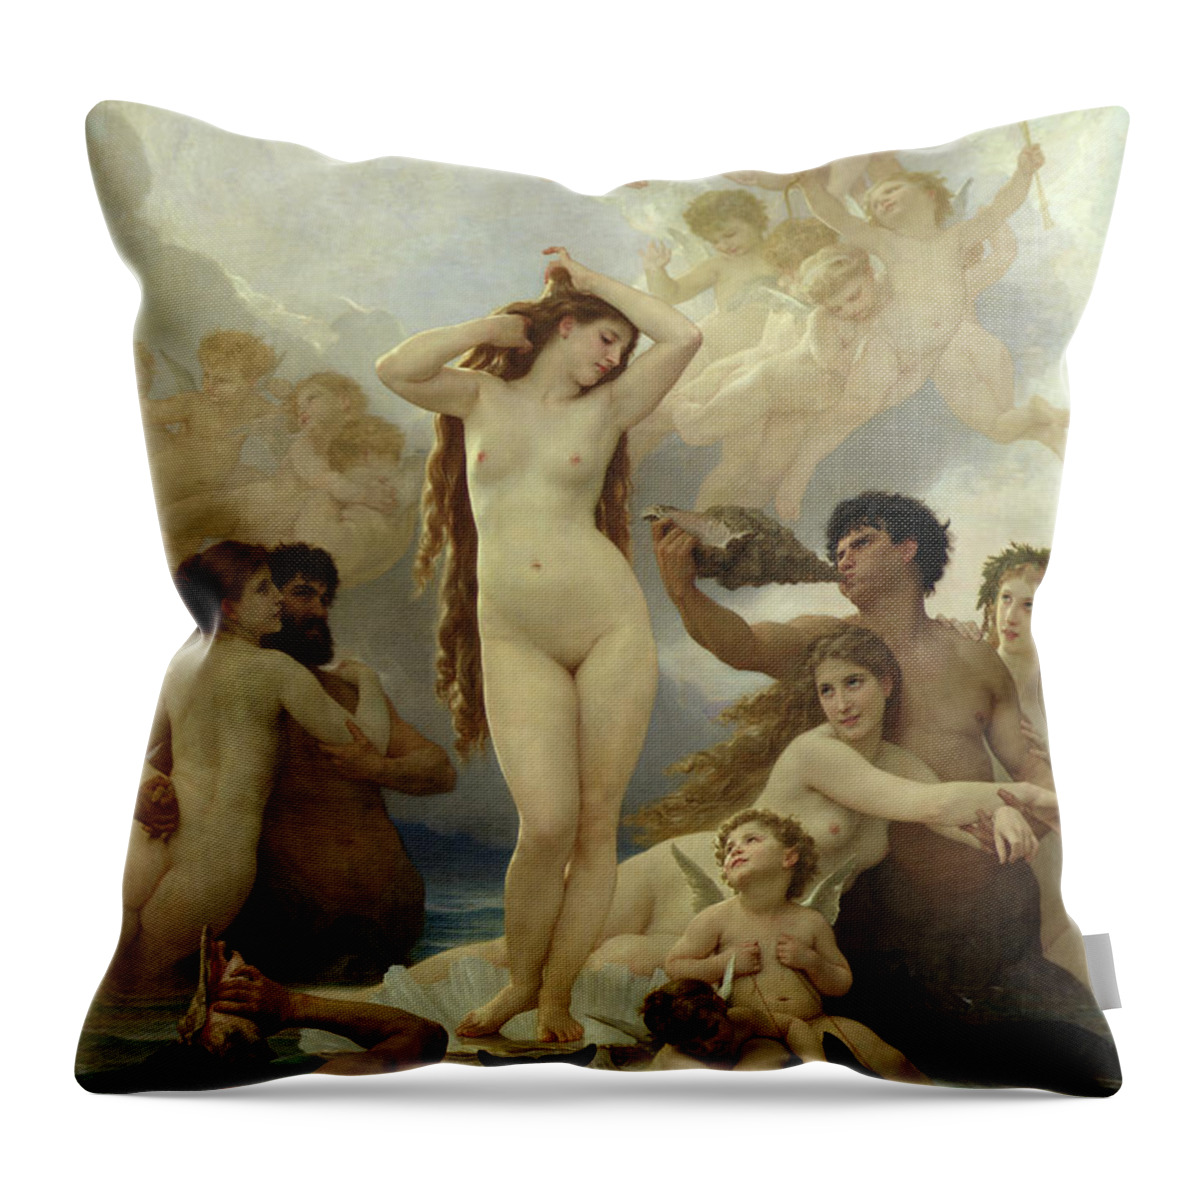 The Throw Pillow featuring the painting The Birth of Venus by William-Adolphe Bouguereau